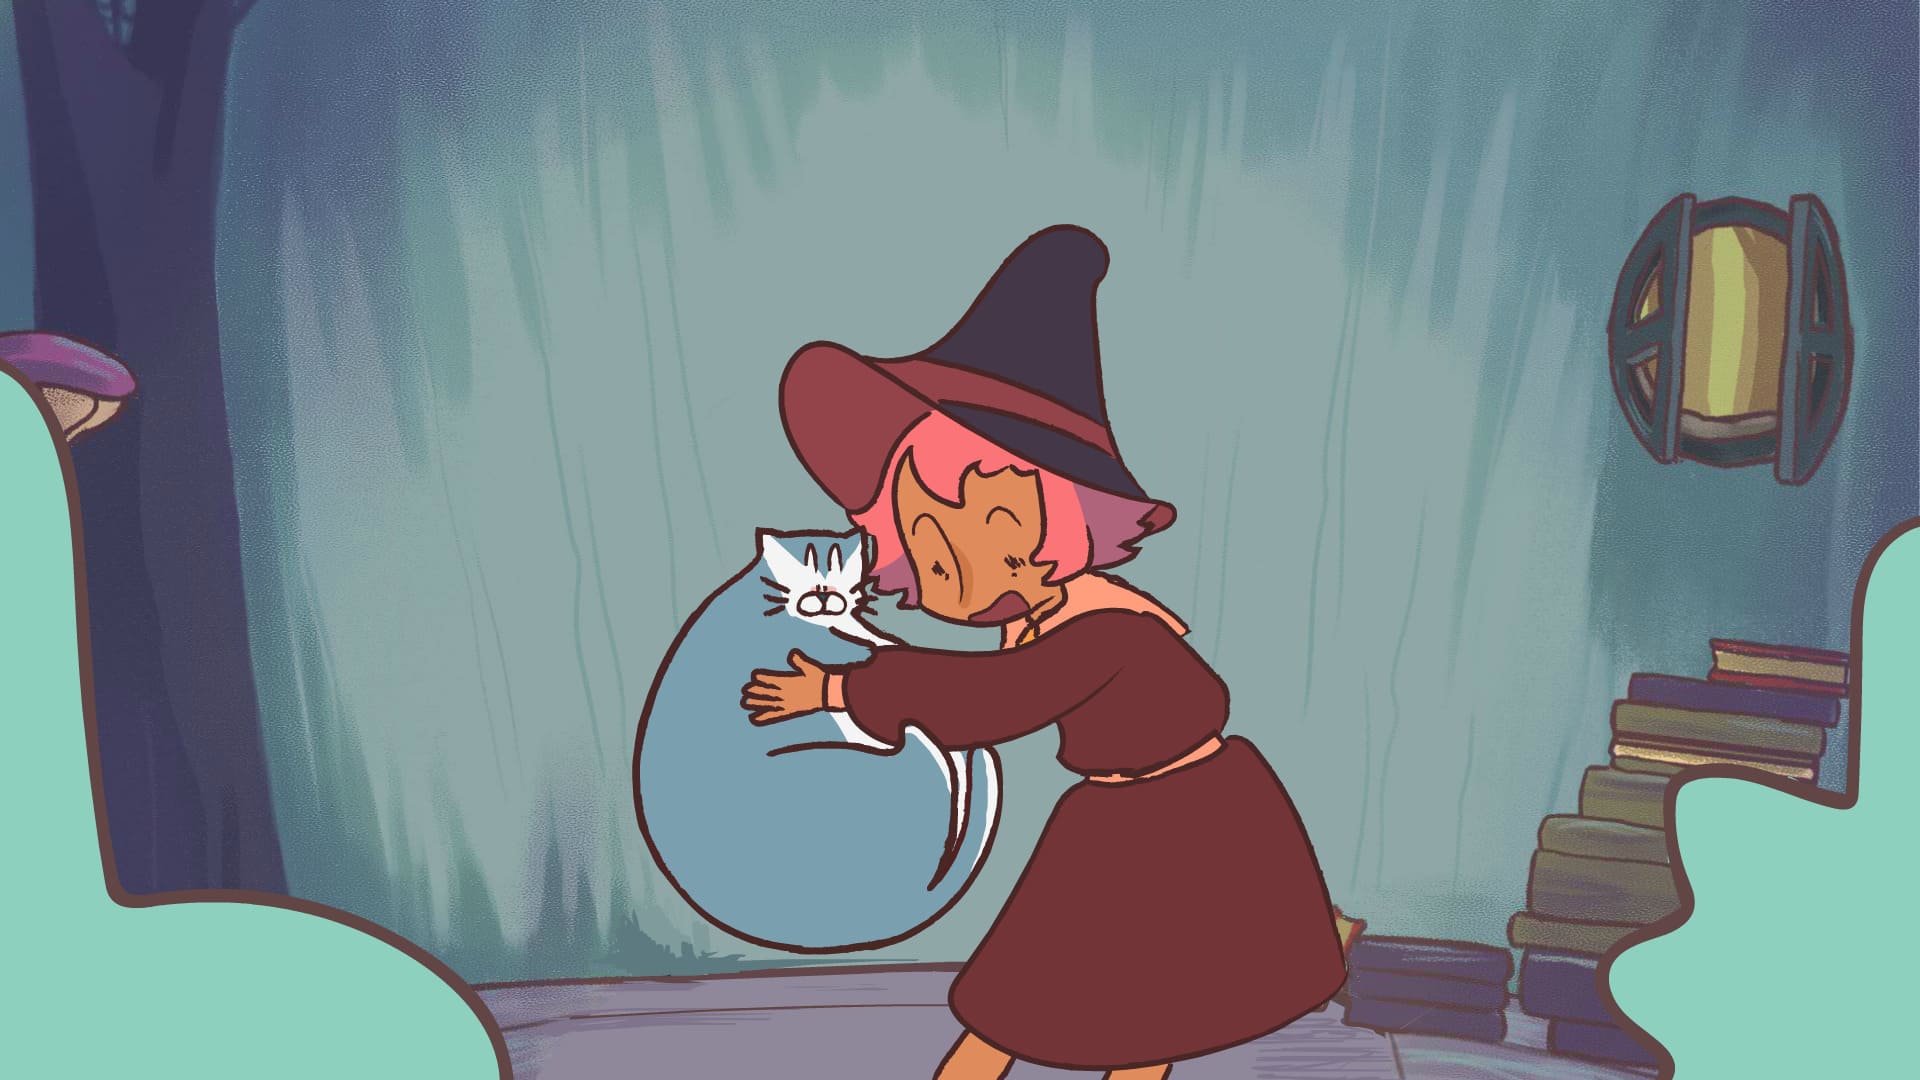 The young witch pushes her cat away from her notebook.